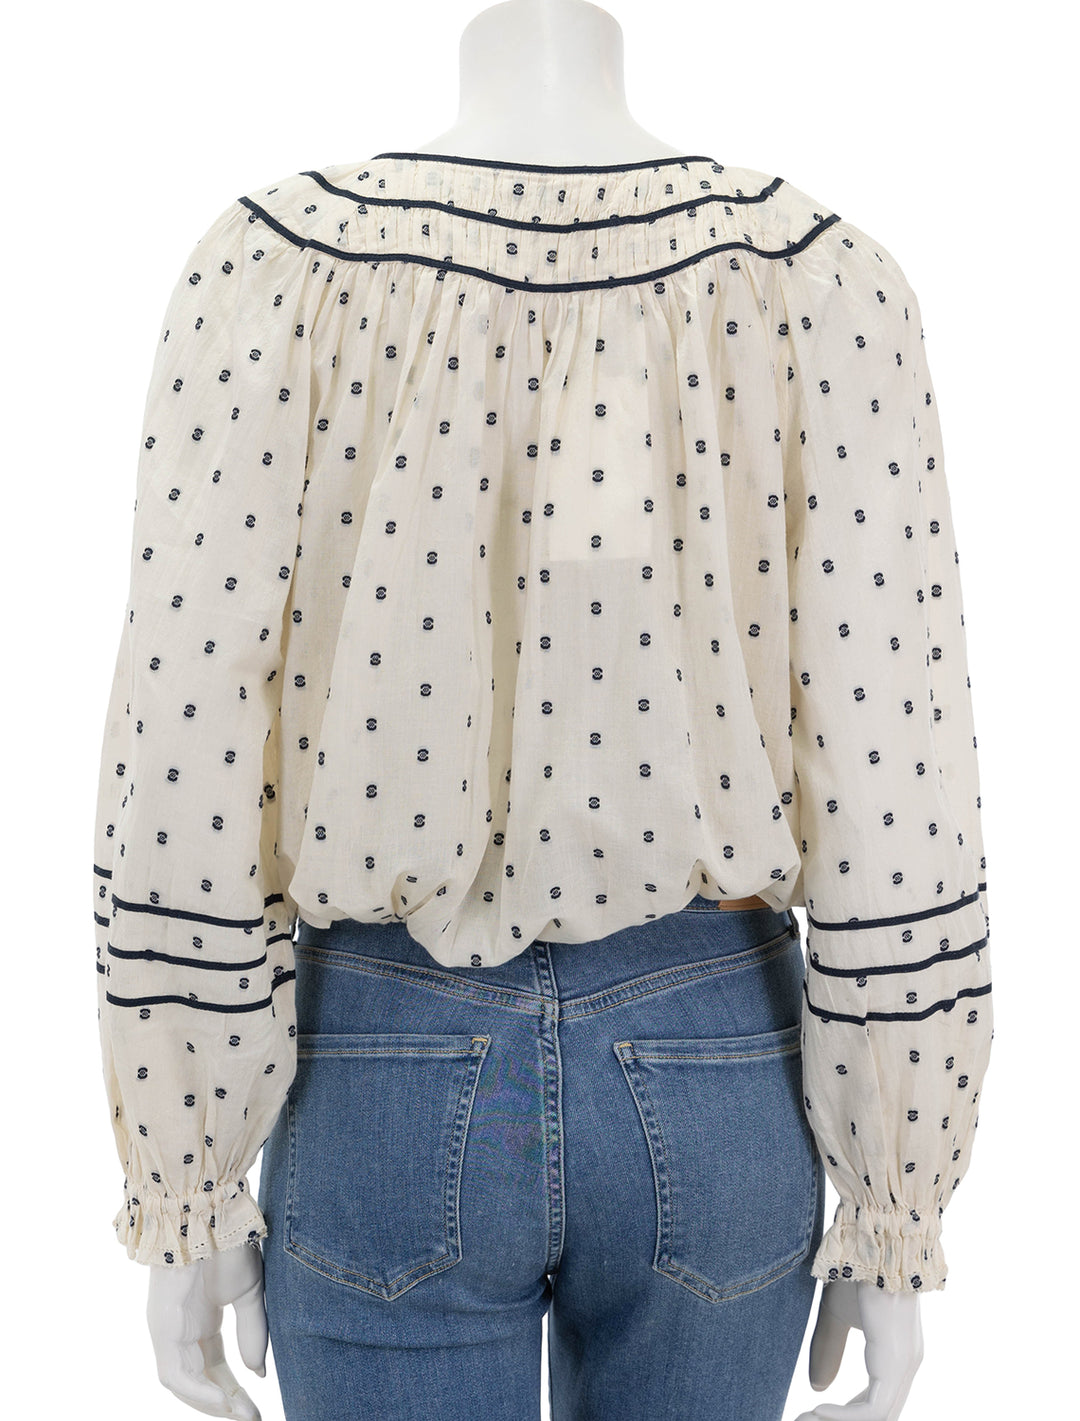 Back view of Ulla Johnson's francoise blouse in ivory.